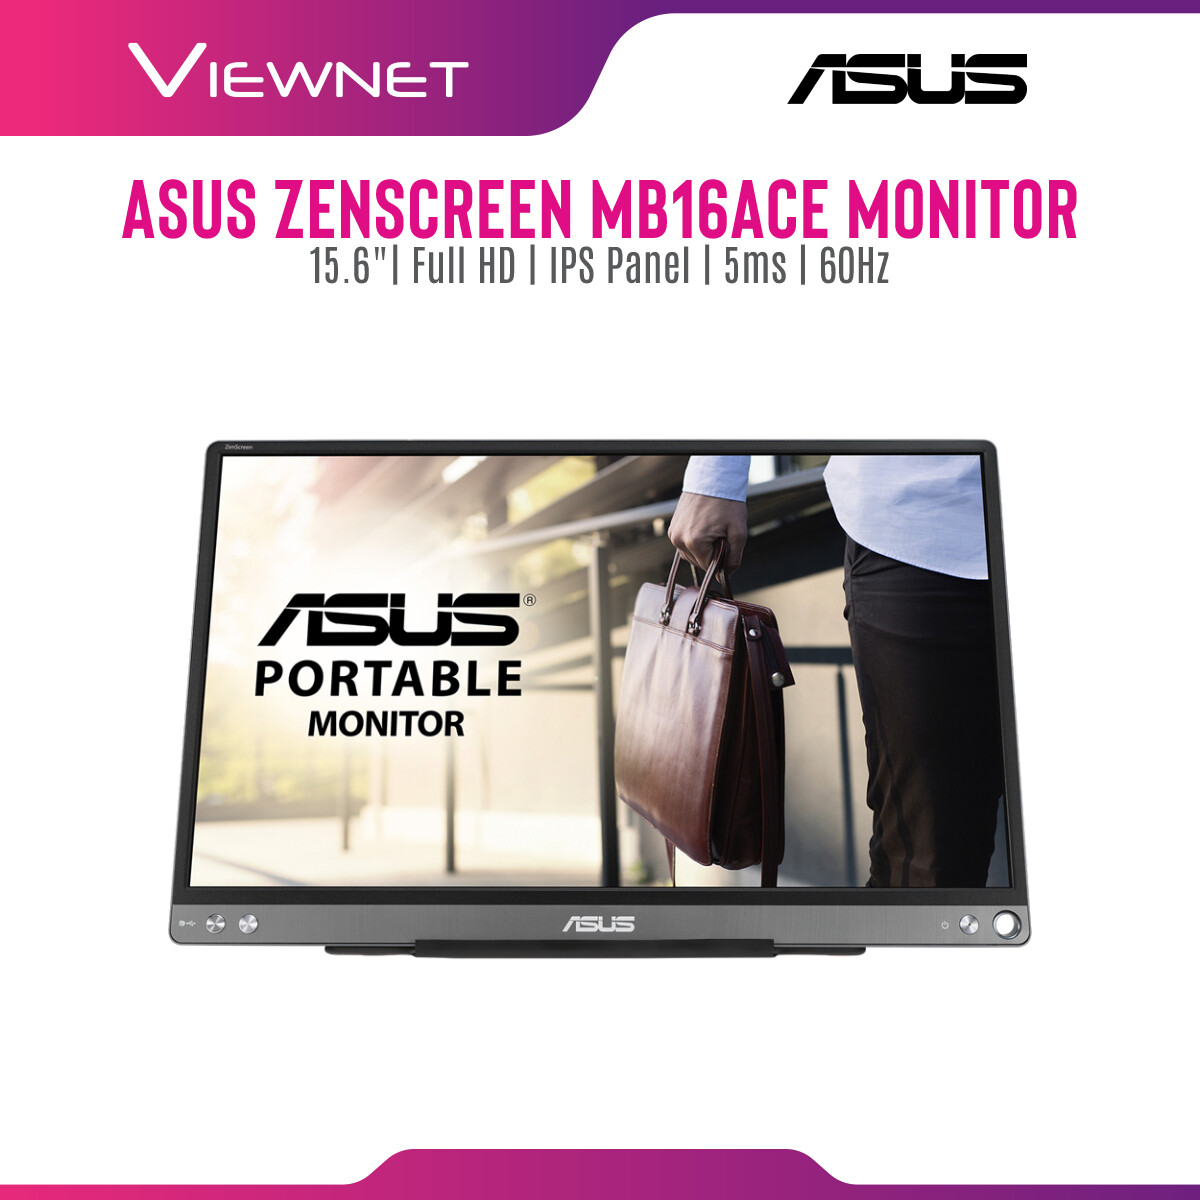 Asus ZenScreen MB16ACE Portable USB Monitor- 15.6 inch Full HD, Hybrid Signal Solution, USB Type-C, Flicker Free, Blue Light Filter, Anti-glare surface